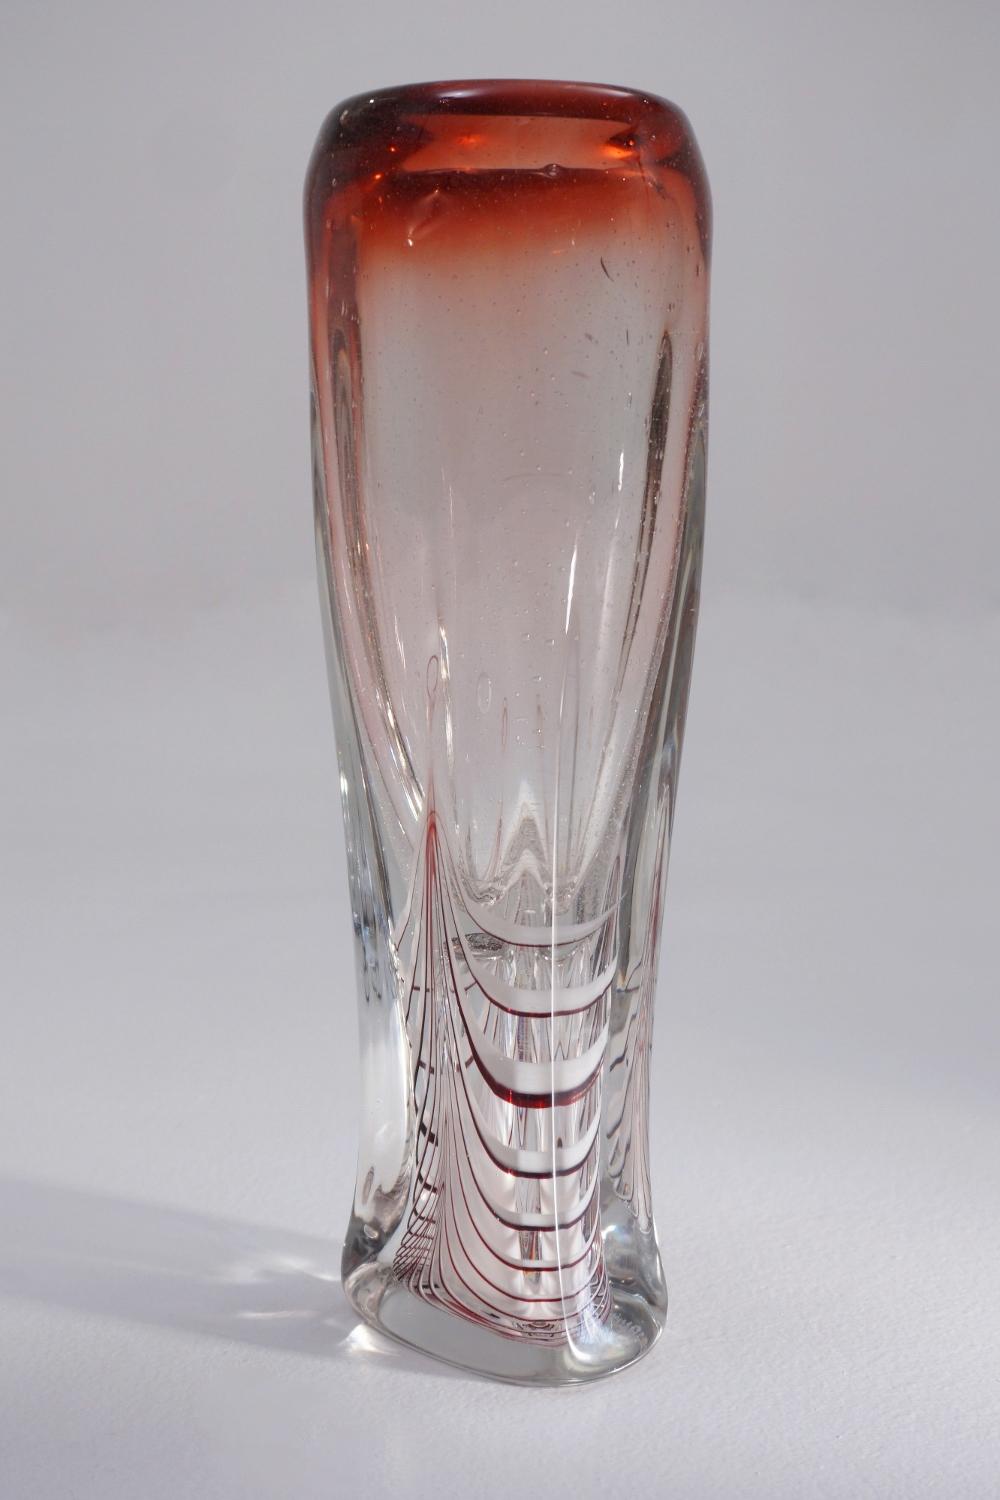 Adam Jablonski glass vase `Fortuna`, signed 1990, Polish.
This vase has been cleaned respecting the vintage patina and is ready to use.

A handmade mouth blown art glass vase, in 24% lead crystal, hand etched by Jablonski himself. Signed at base: